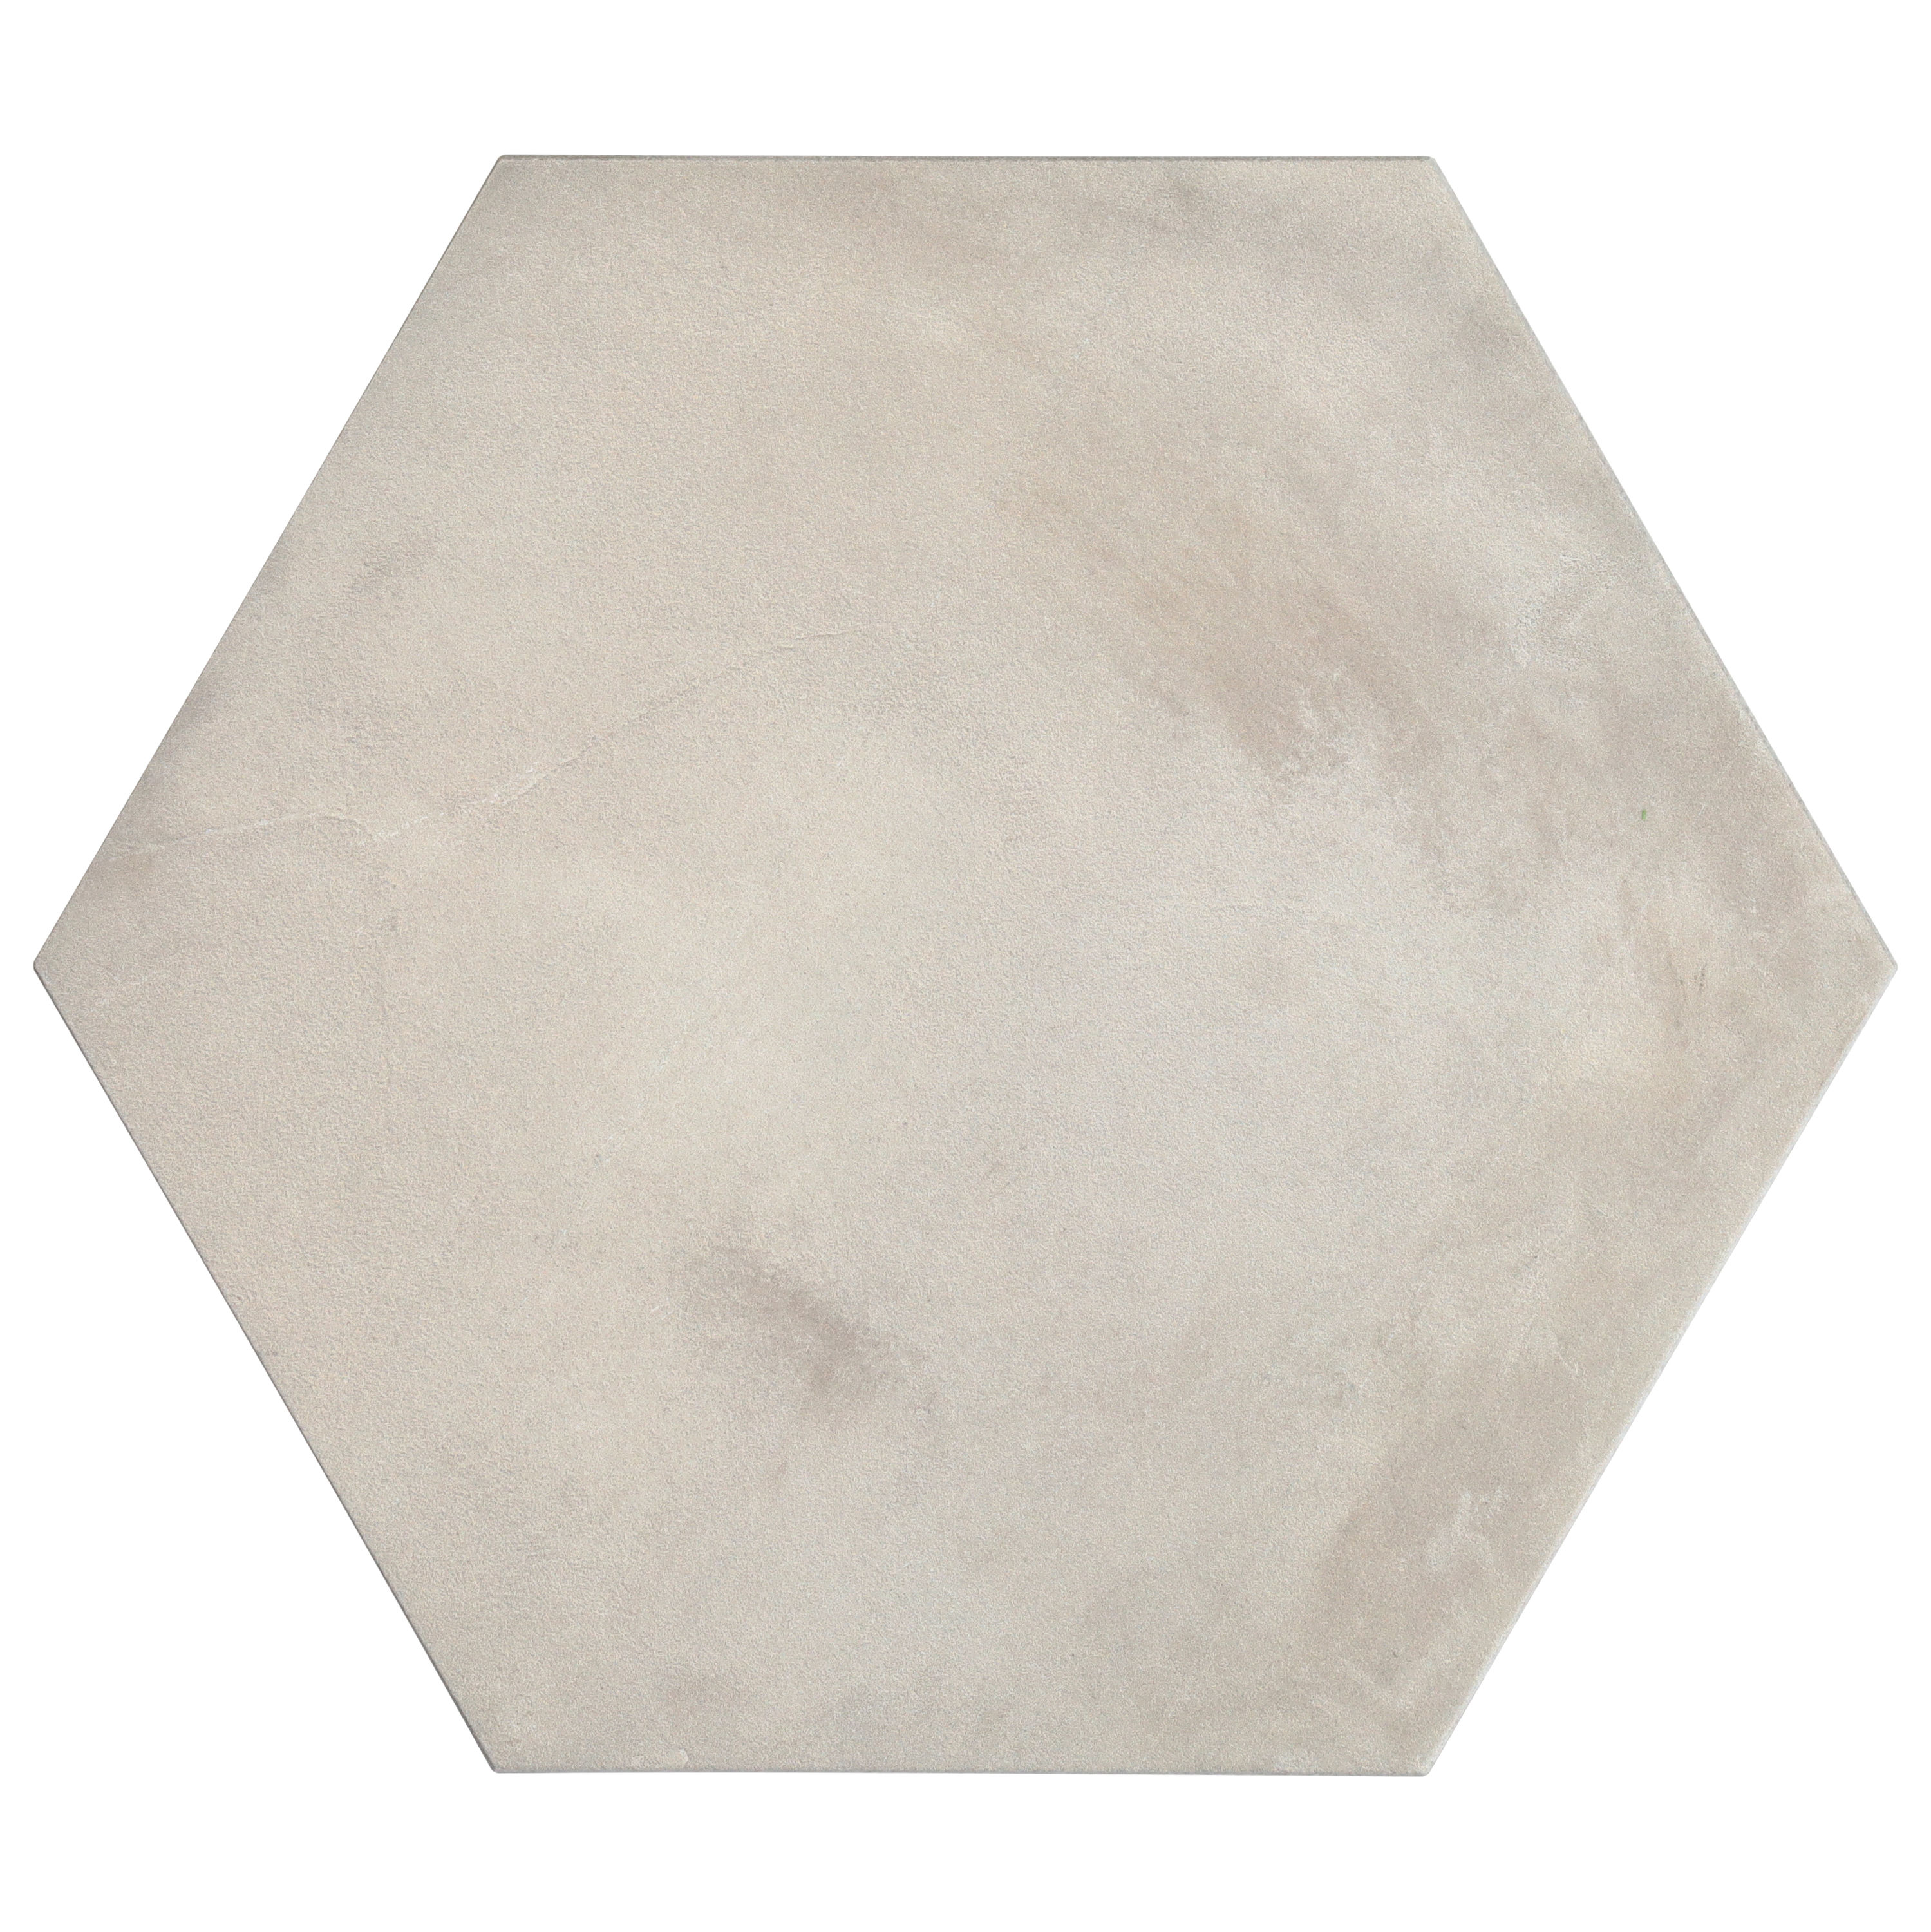 Artmore Tile Storm Hex Gray Sabbia 8-in x 10-in Matte Porcelain ...